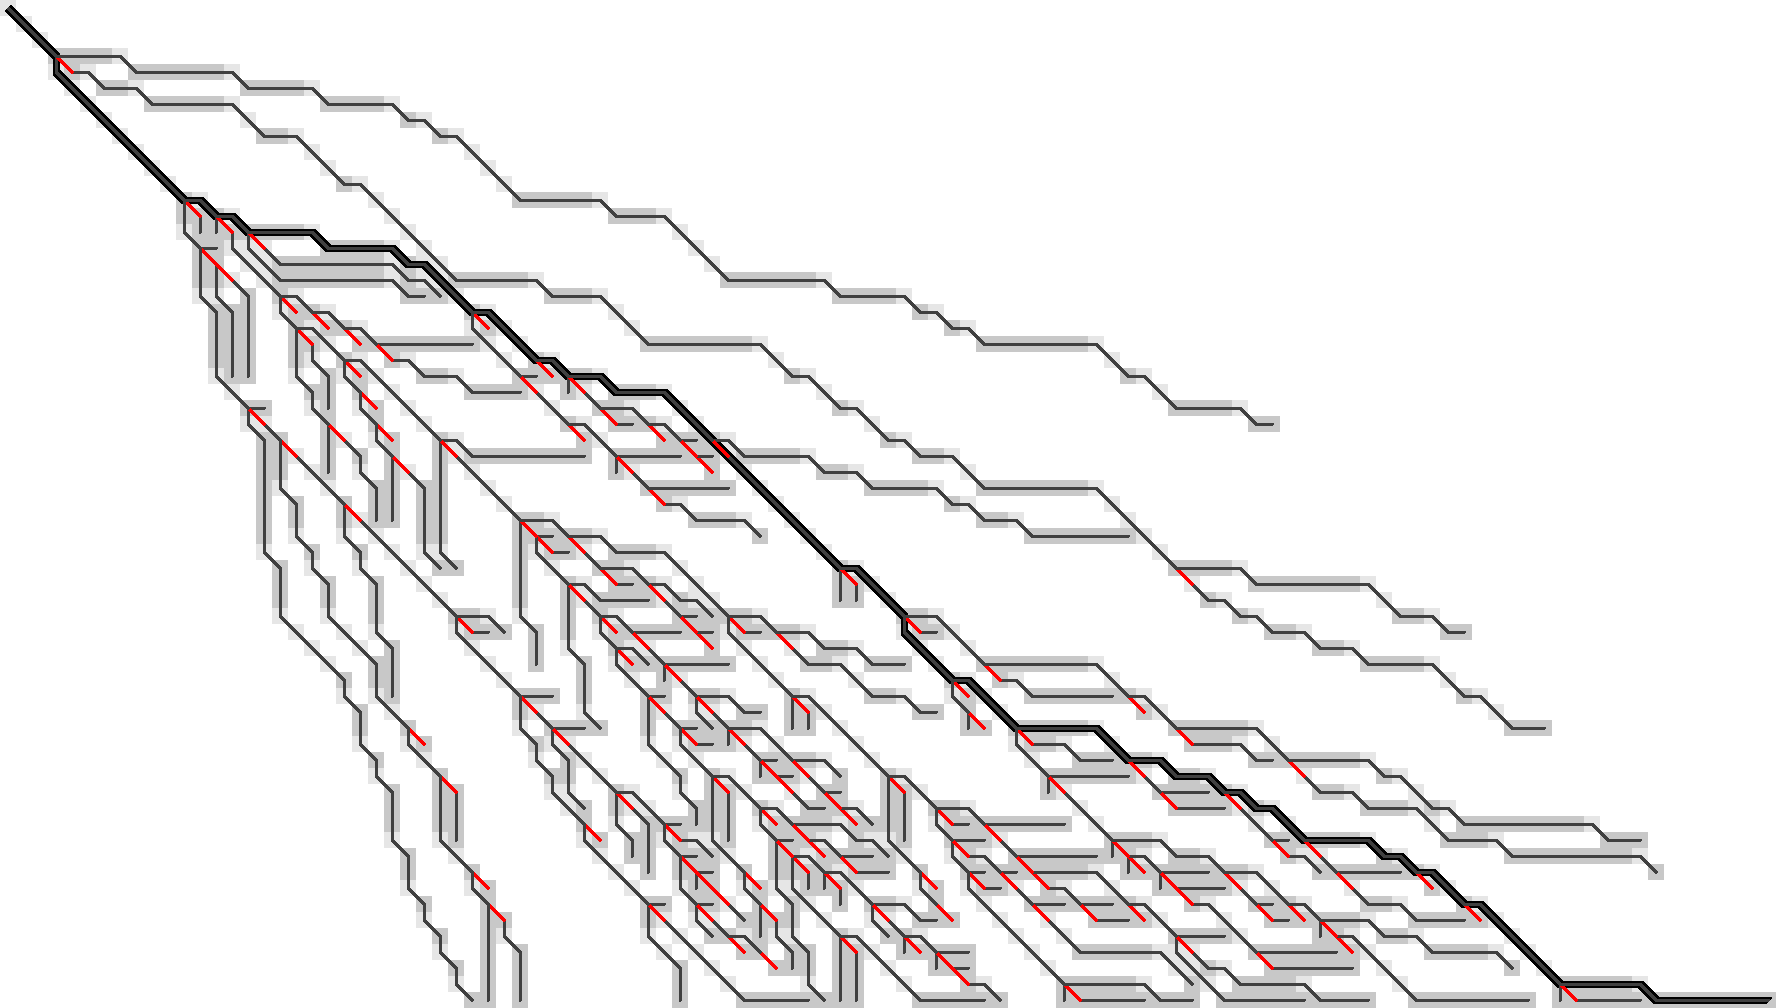 Figure 1: WFA on two sequences made of (11) and (6) copies of a repeating pattern with (20%) mutations applied to each. F.r. states are grey, and extended states are lighter grey. Substitutions on the tracebacks are red. Click the image to open a larger version in a new tab.